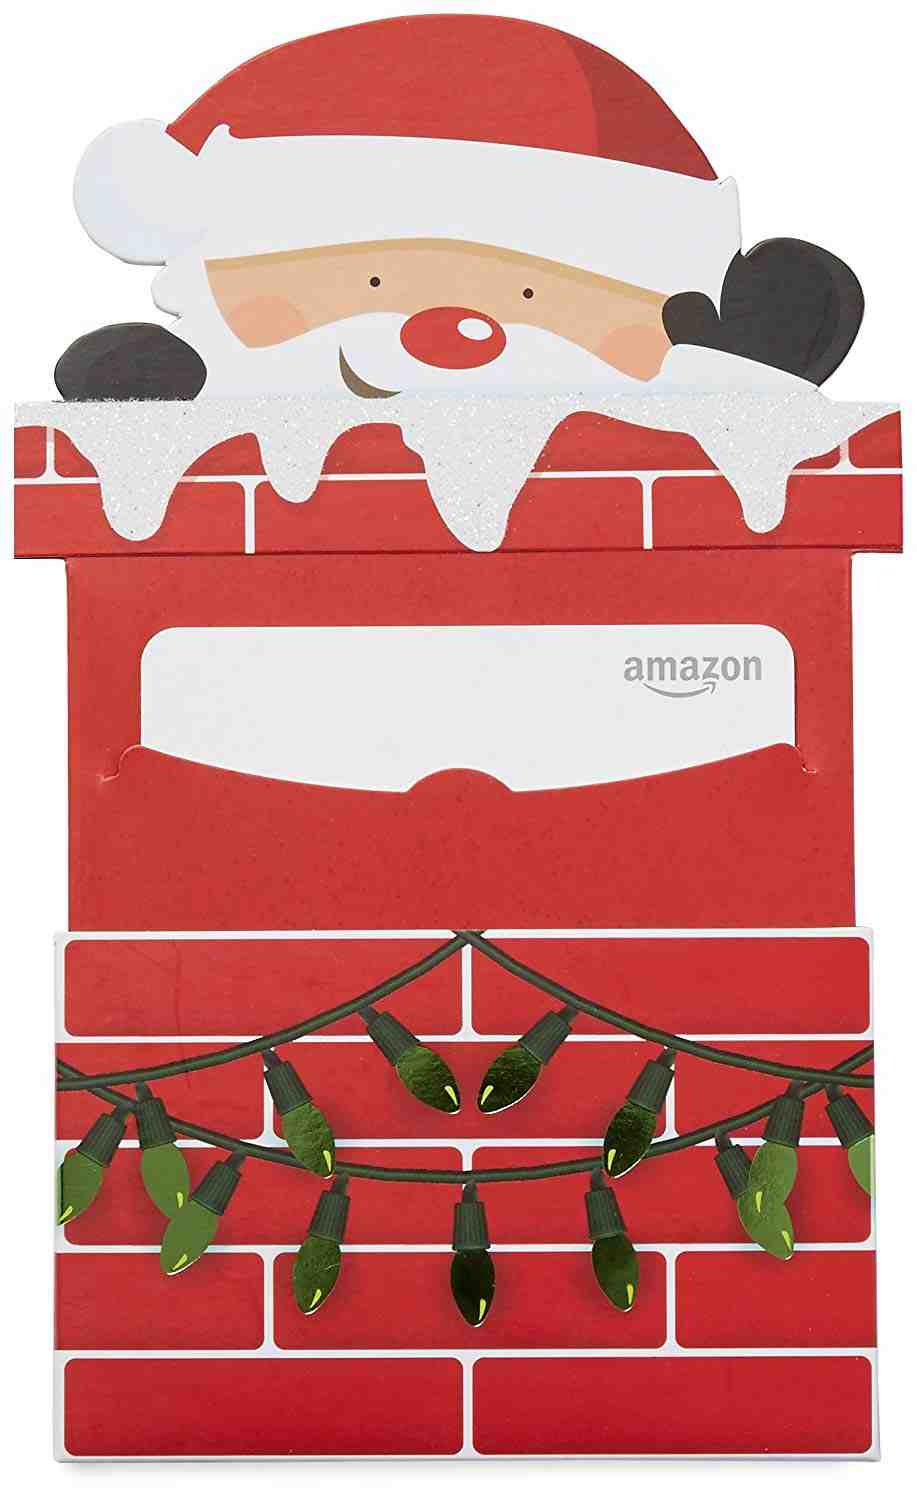 online contests, sweepstakes and giveaways - <span style="color: #0000ff;"><B><font face="arial">Win a $1,000 Amazon Gift Card in a Santa Chimney